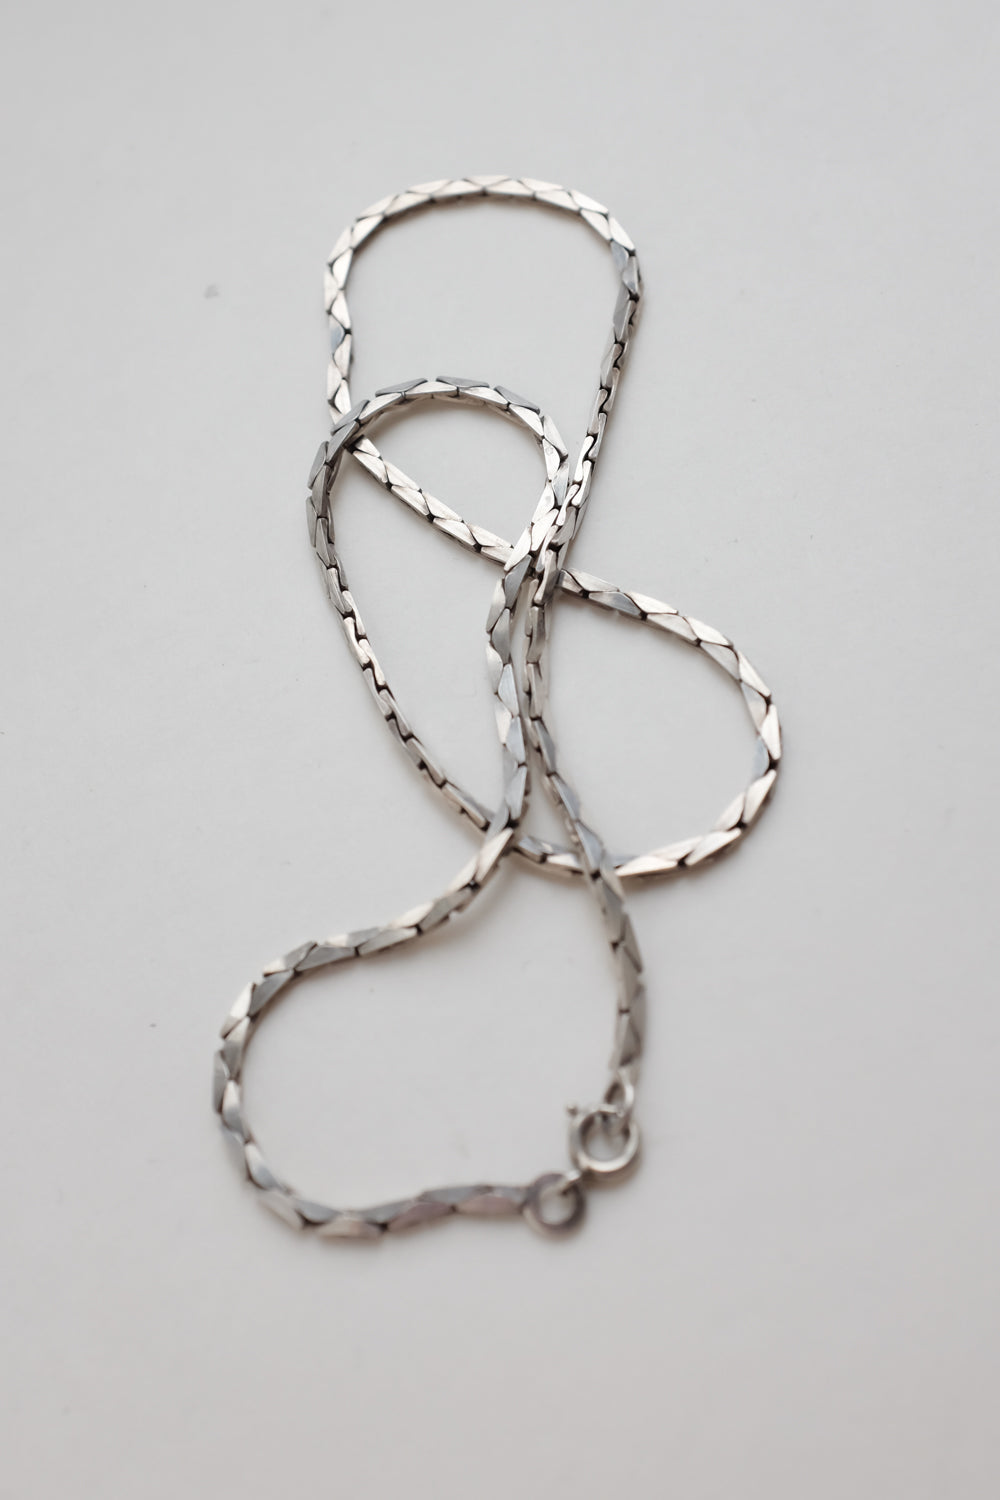 CLASSY STERLING SILVER 925 VINTAGE NECKLACE